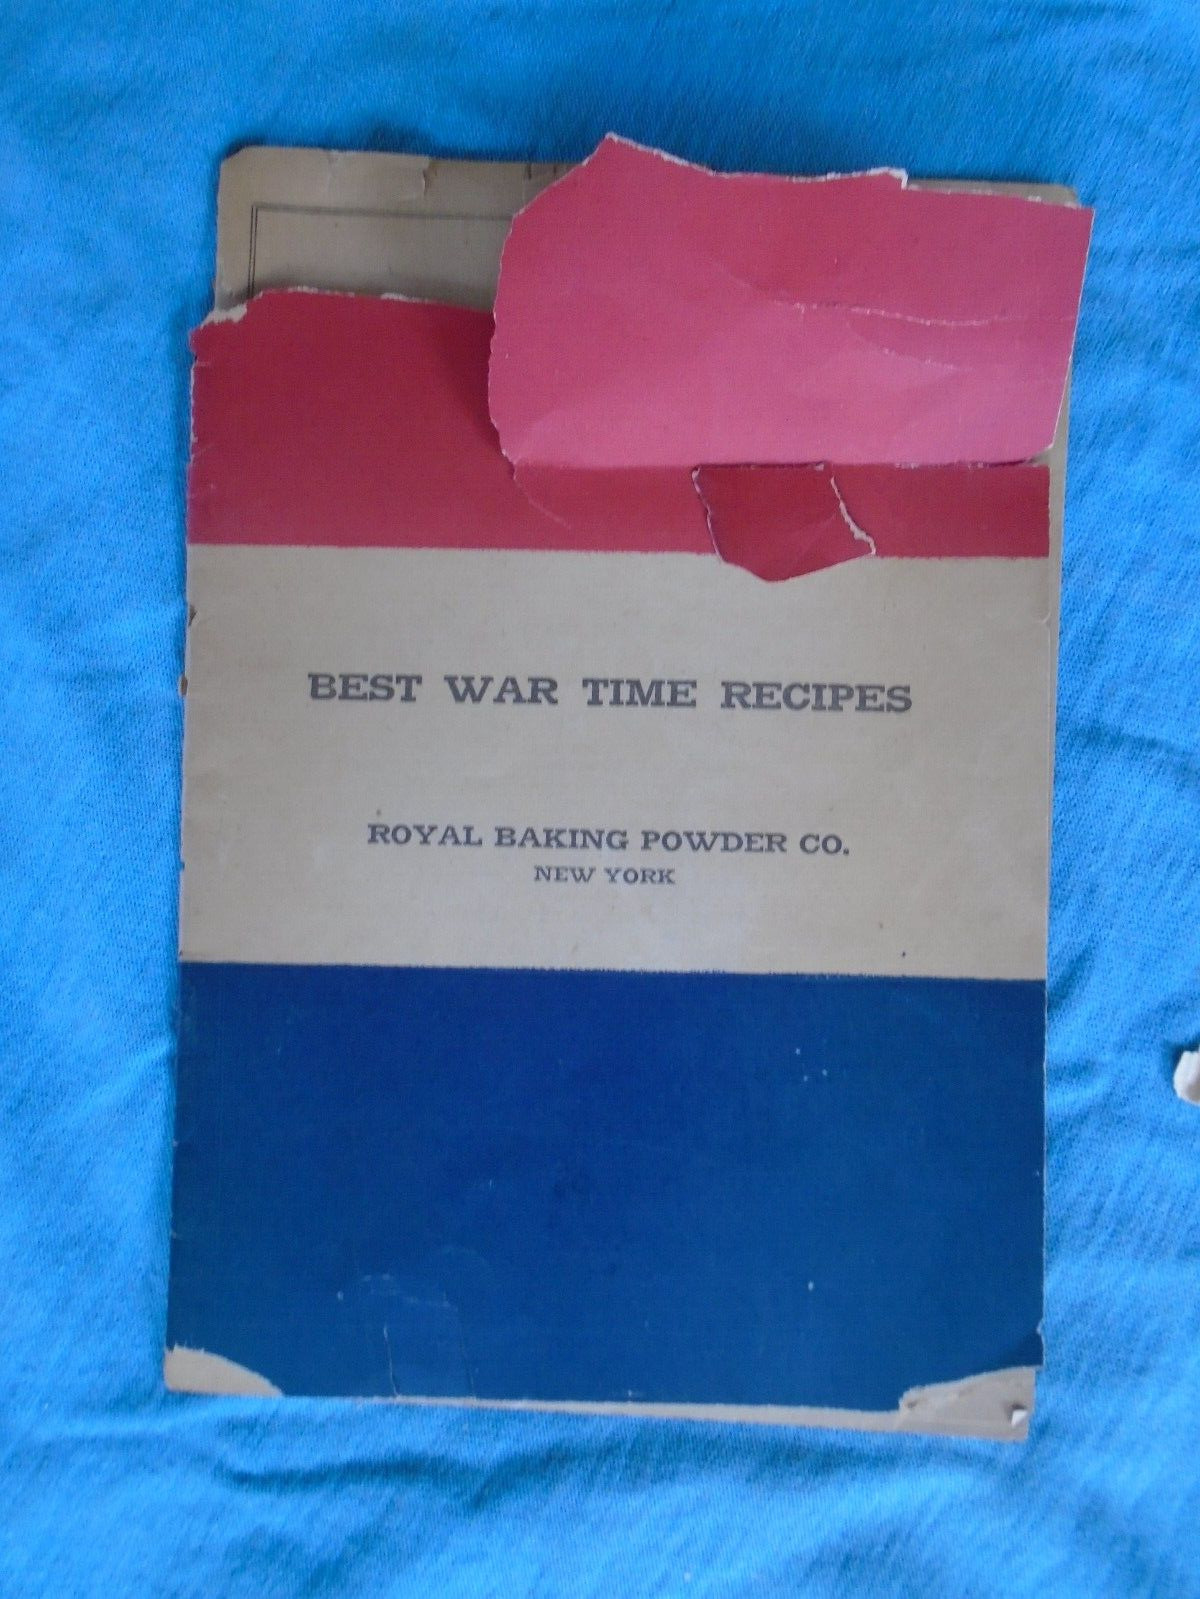 WWI home front, Best Wartime Recipes